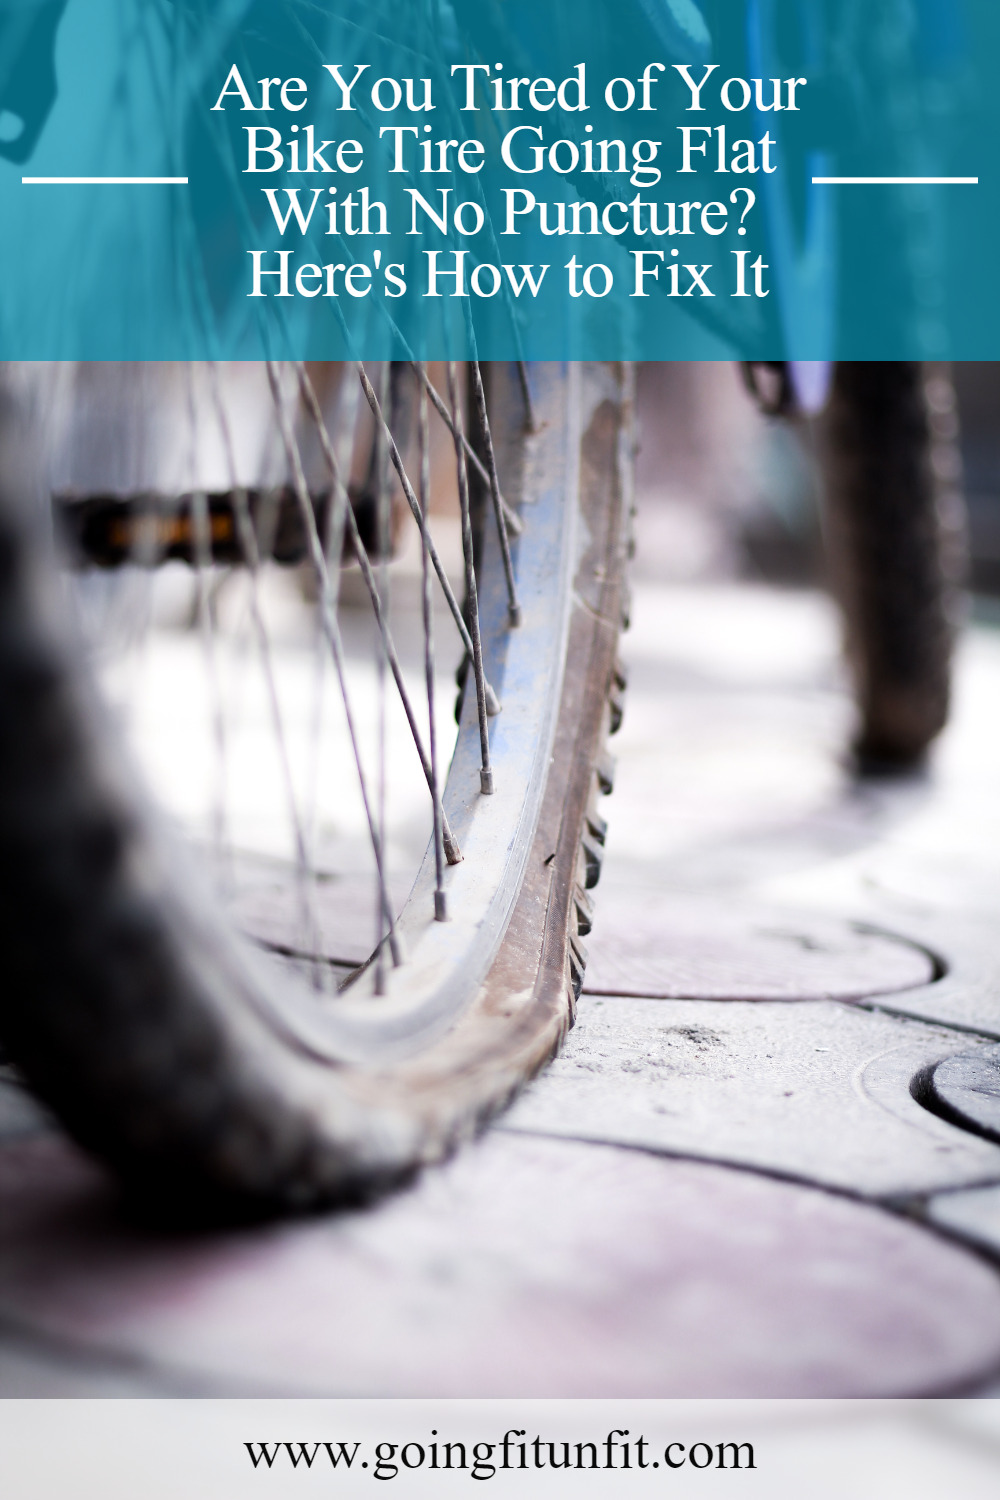 Are You Tired of Your Bike Tire Going Flat With No Puncture? Here's How to Fix It